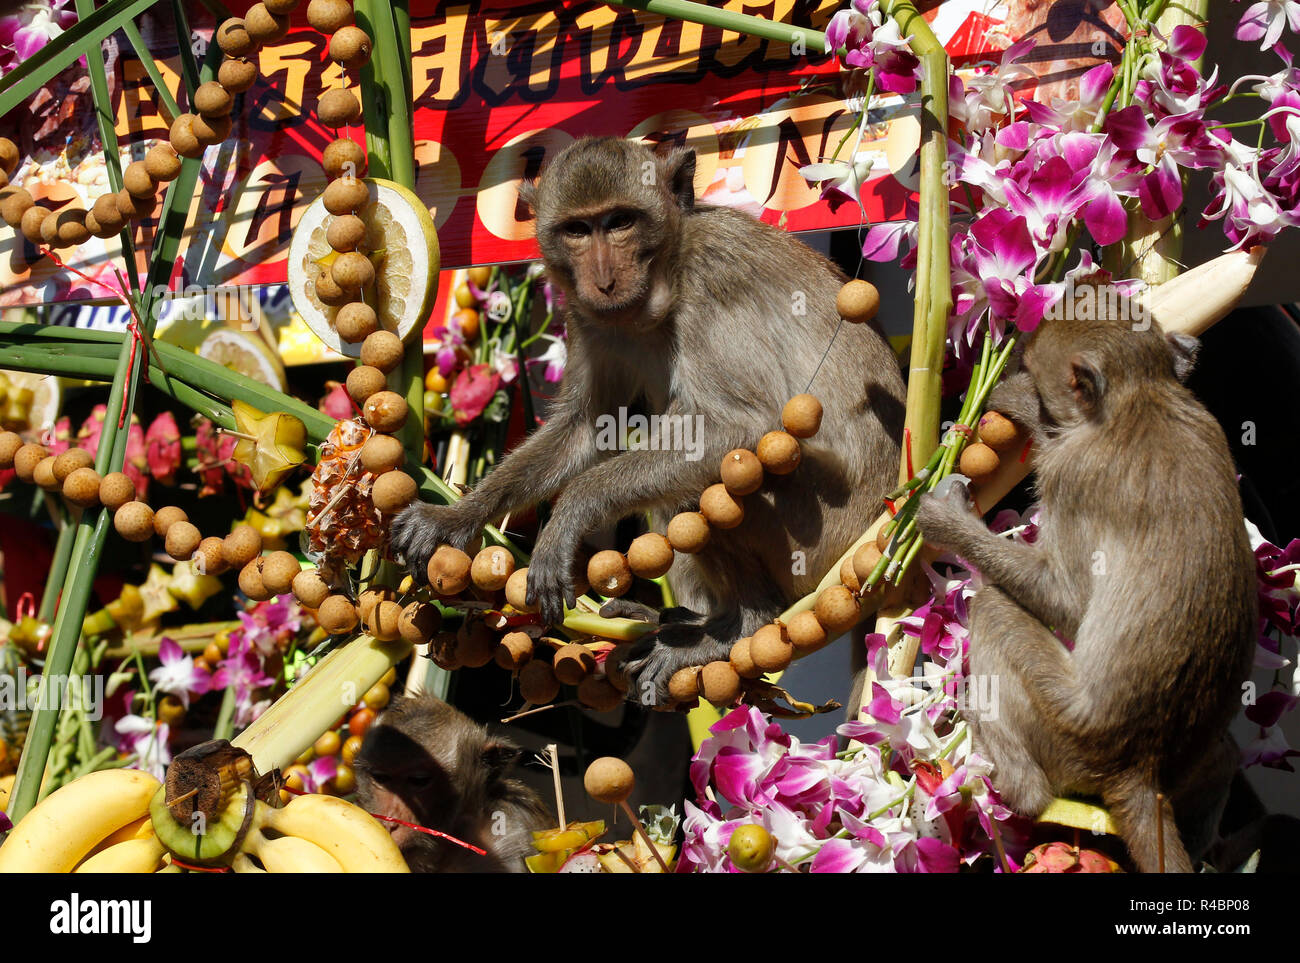 Lopburi, Thailand. 25th Nov, 2018. Monkeys eat fruits and vegetables during  the annual Monkey Buffet Festival at the Phra Prang Sam Yot temple in  Lopburi province, north of Bangkok, Thailand Credit: Chaiwat